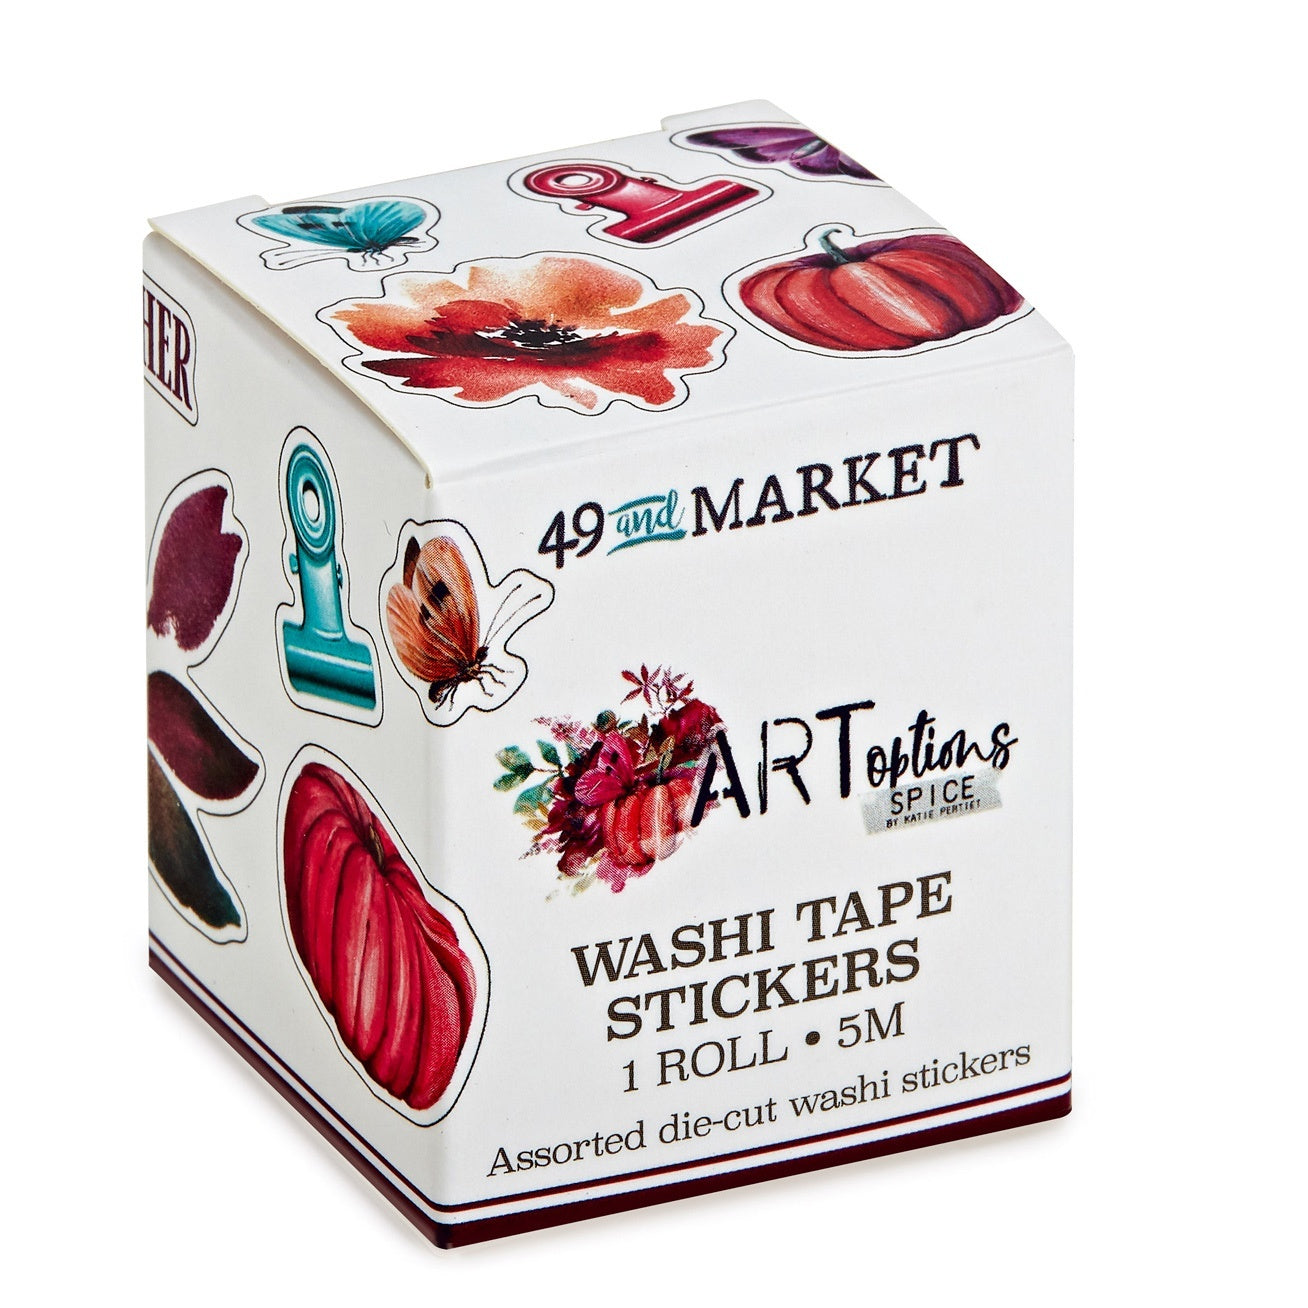 49 and Market  Washi Tape Art Options Stickers spice